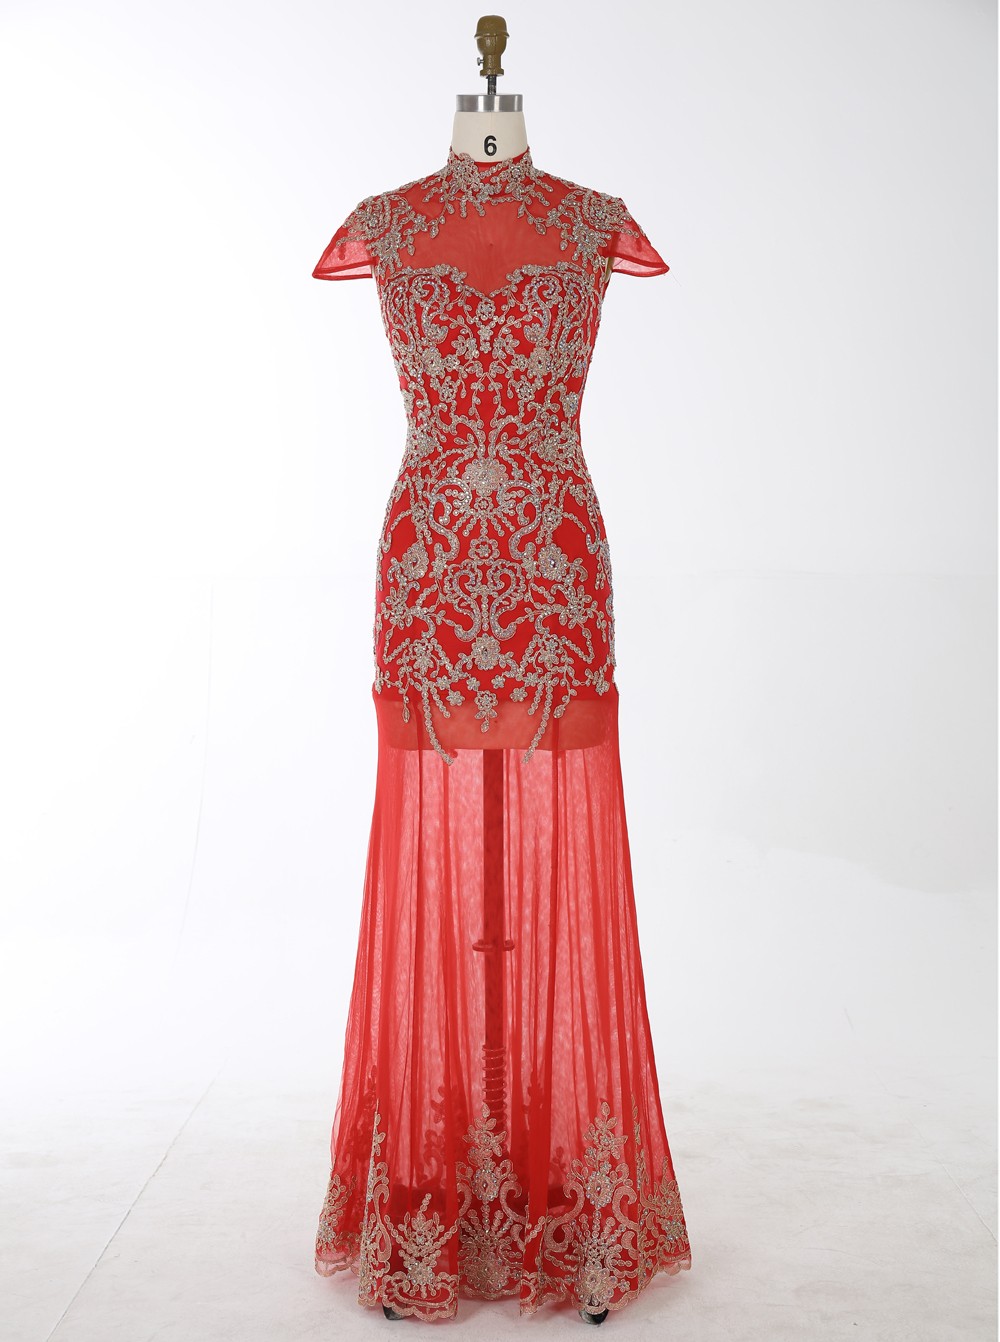 Mermaid High Neck Long Chiffon Cap Sleeves Backless Red Prom Dress With Beading Appliques,pl5858